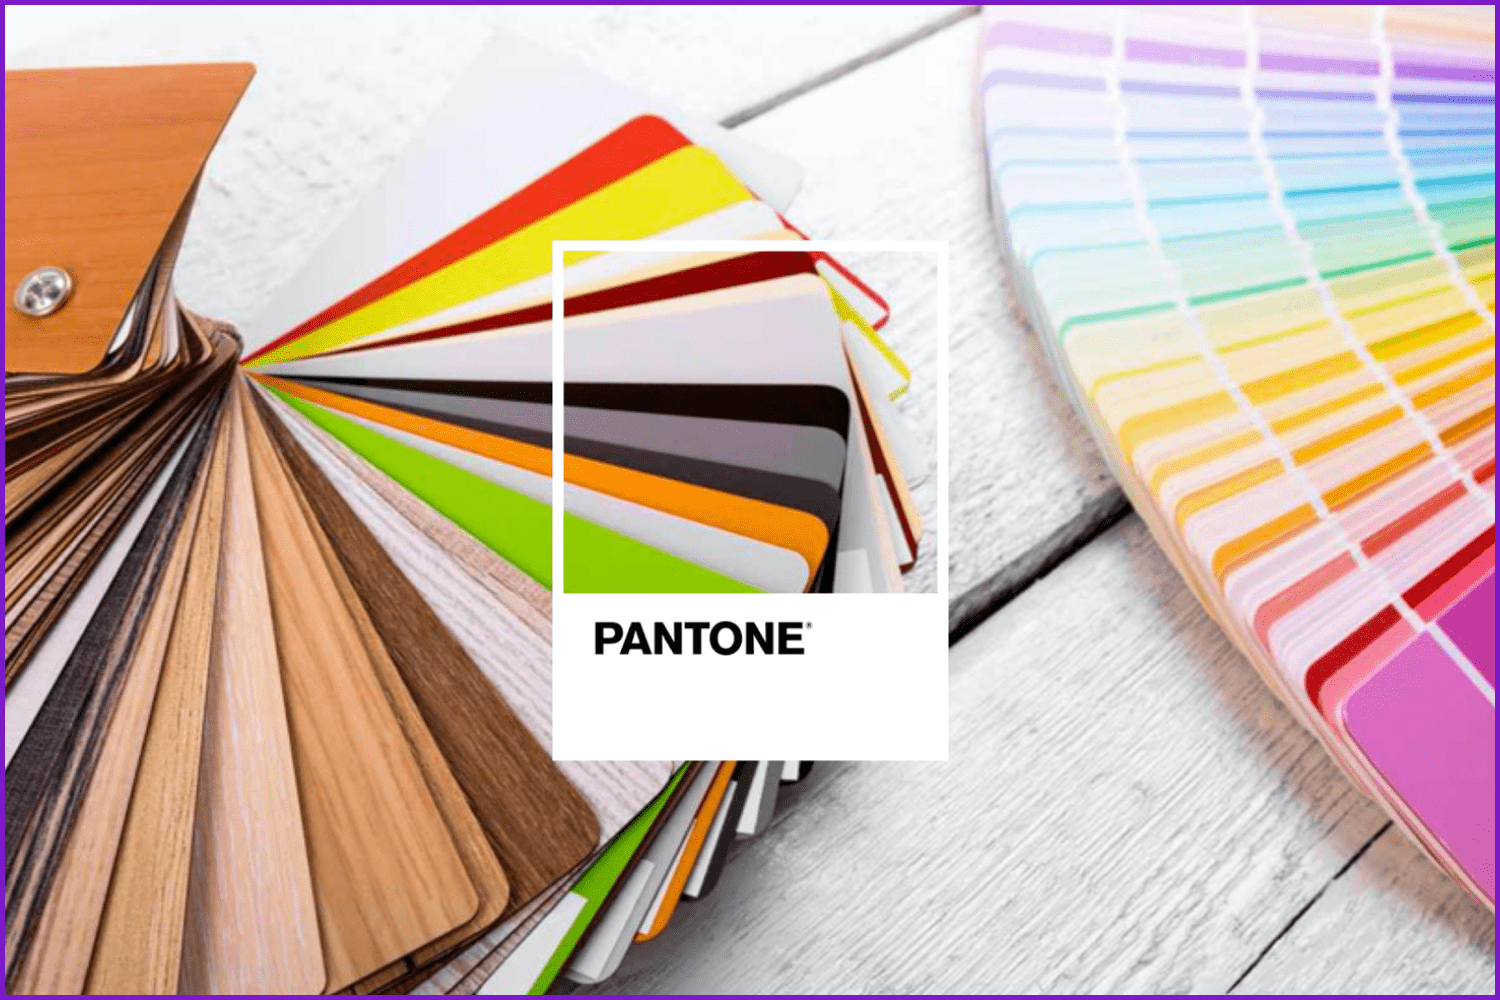 Panton with bright trends color.